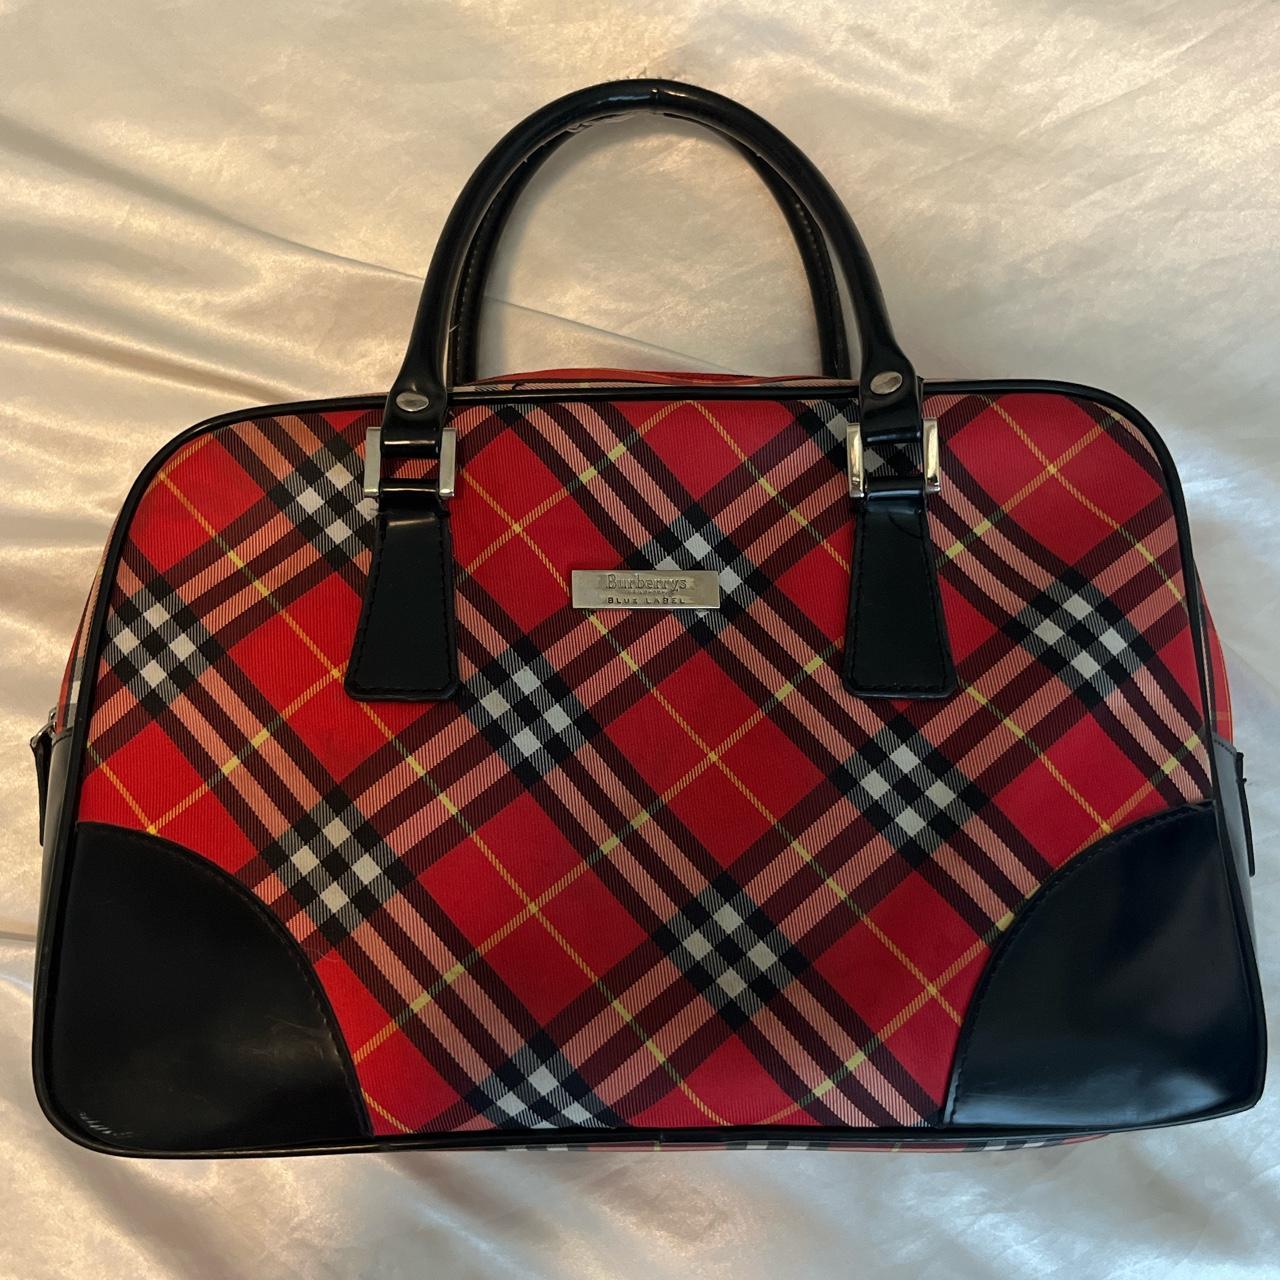 Burberry, Bags, Beautiful Burberry Boston Bag Like New Condition